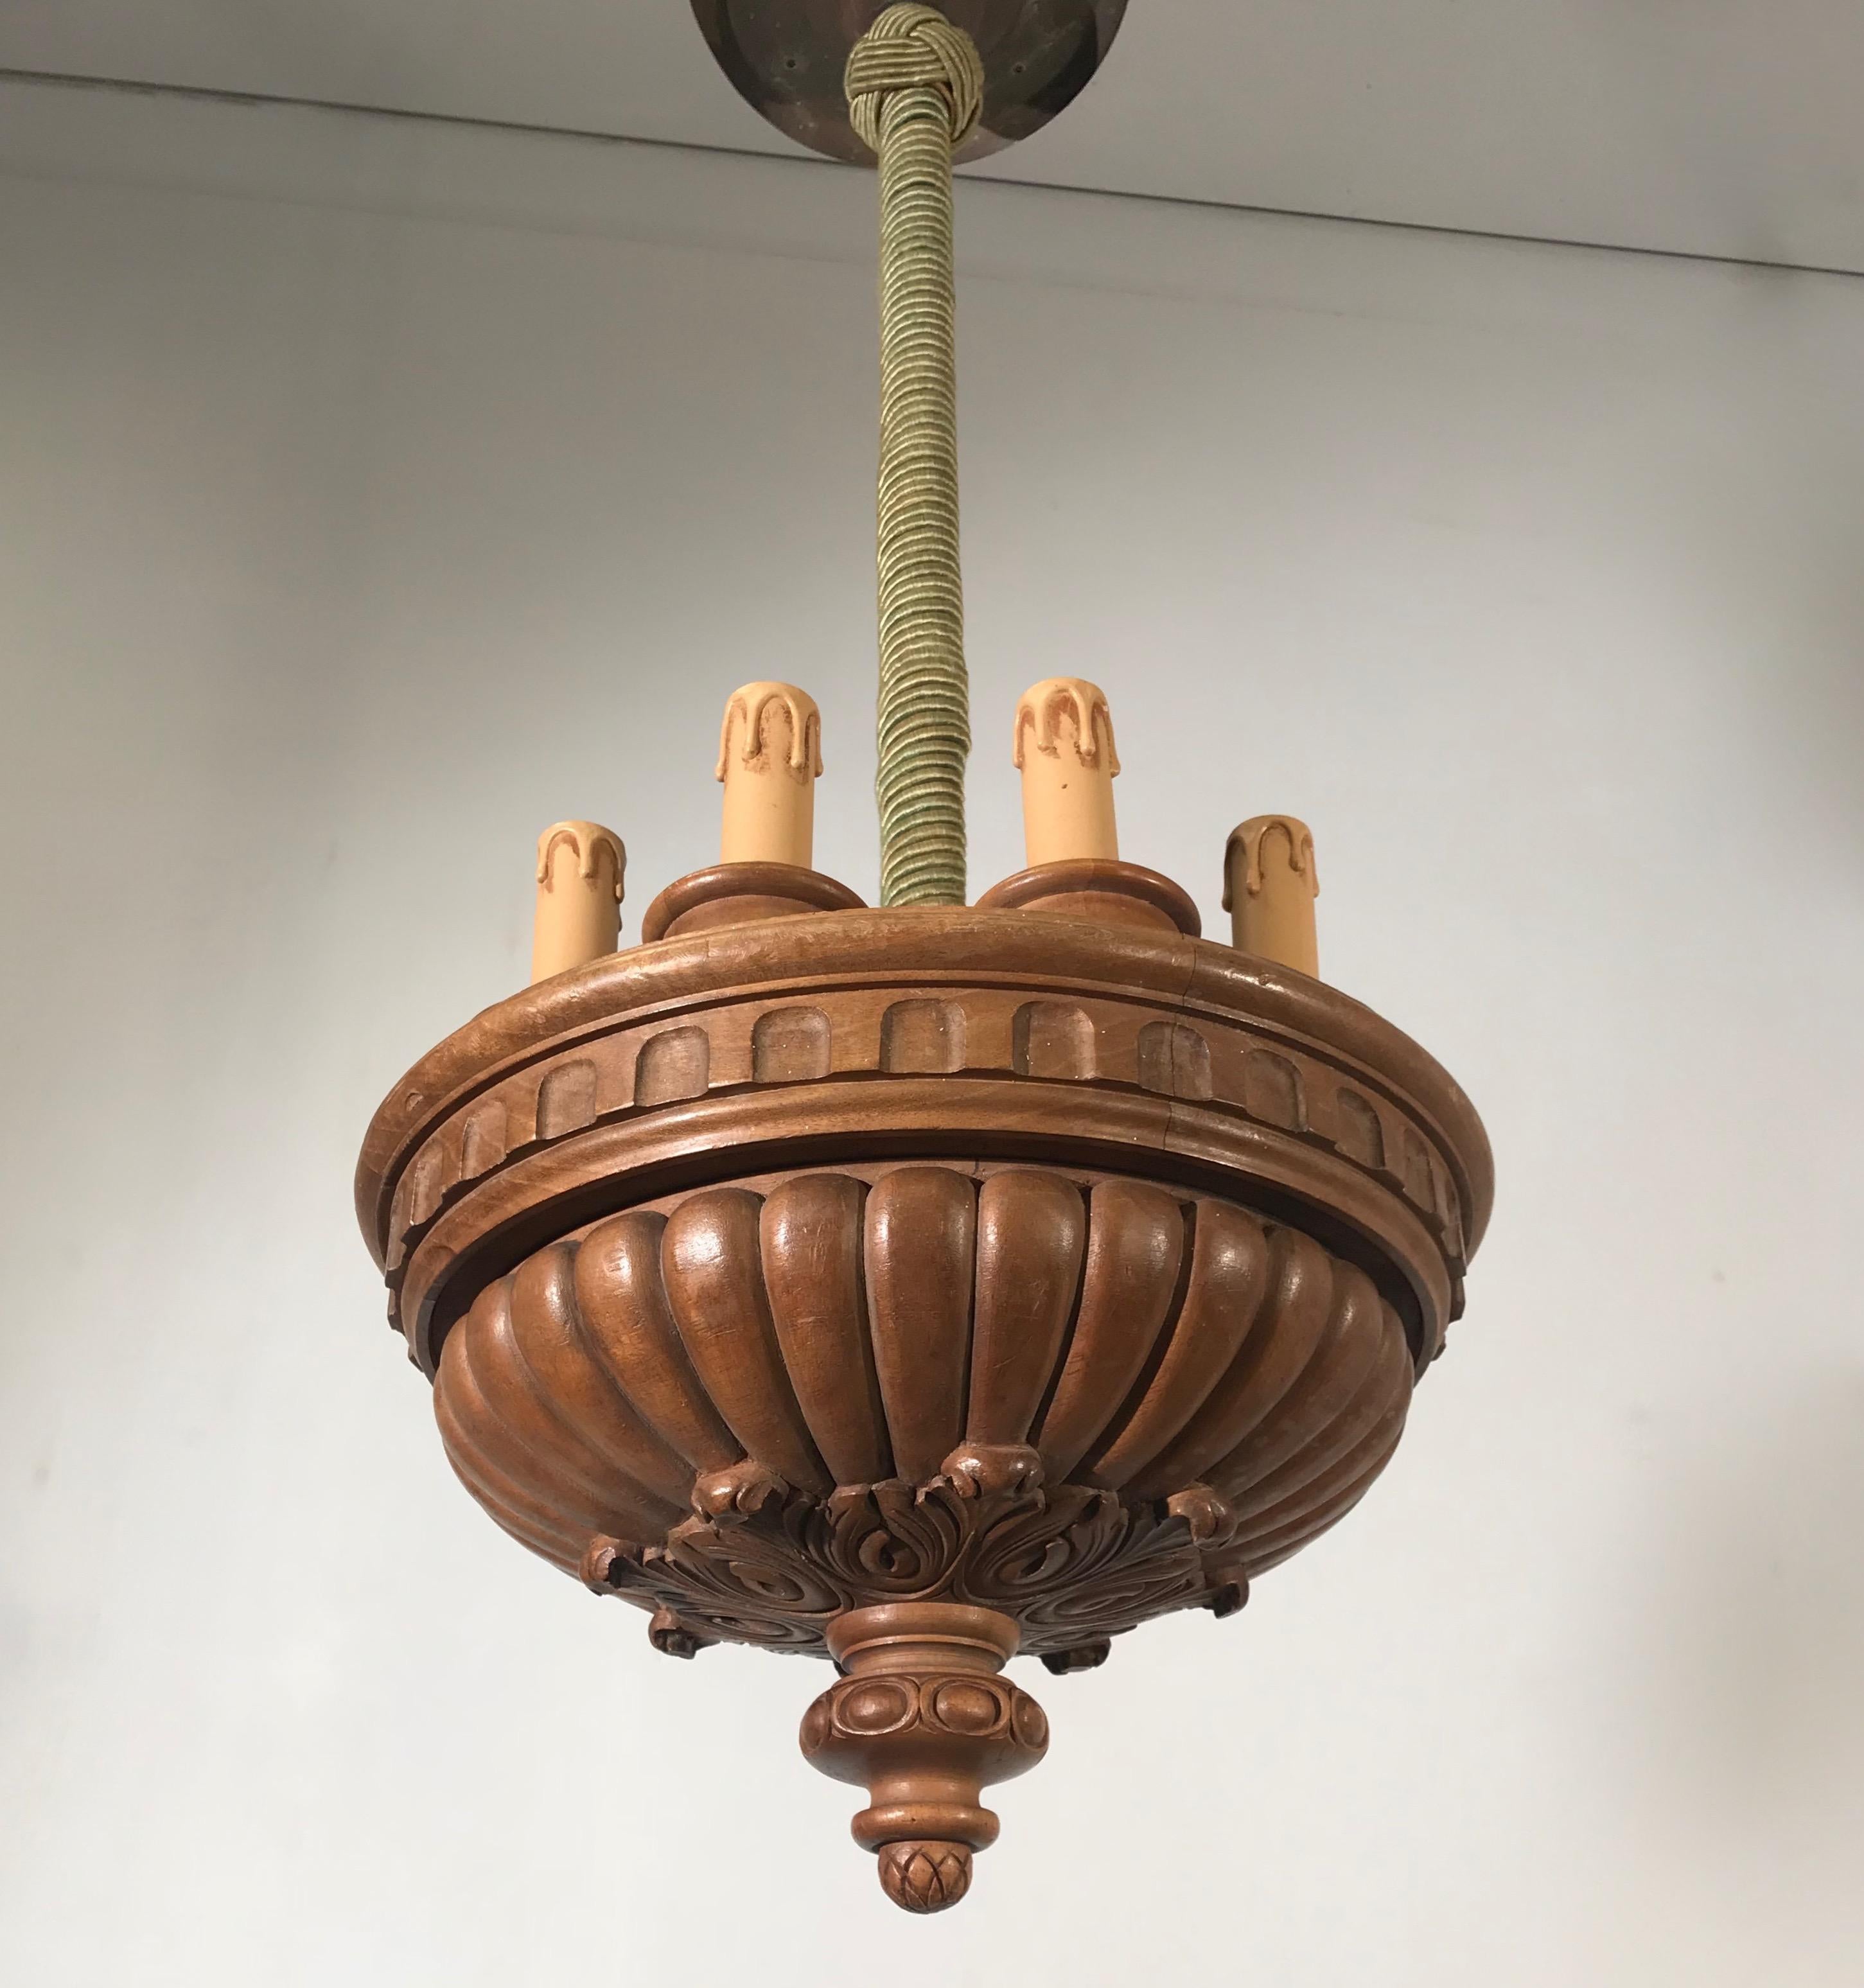 Stylish and all handcrafted fixture from the turn of the century. 

This good quality and practical size, hundred years old light fixture could be perfect for one of your rooms or maybe for gracing your entrance. This turn of the century workmanship